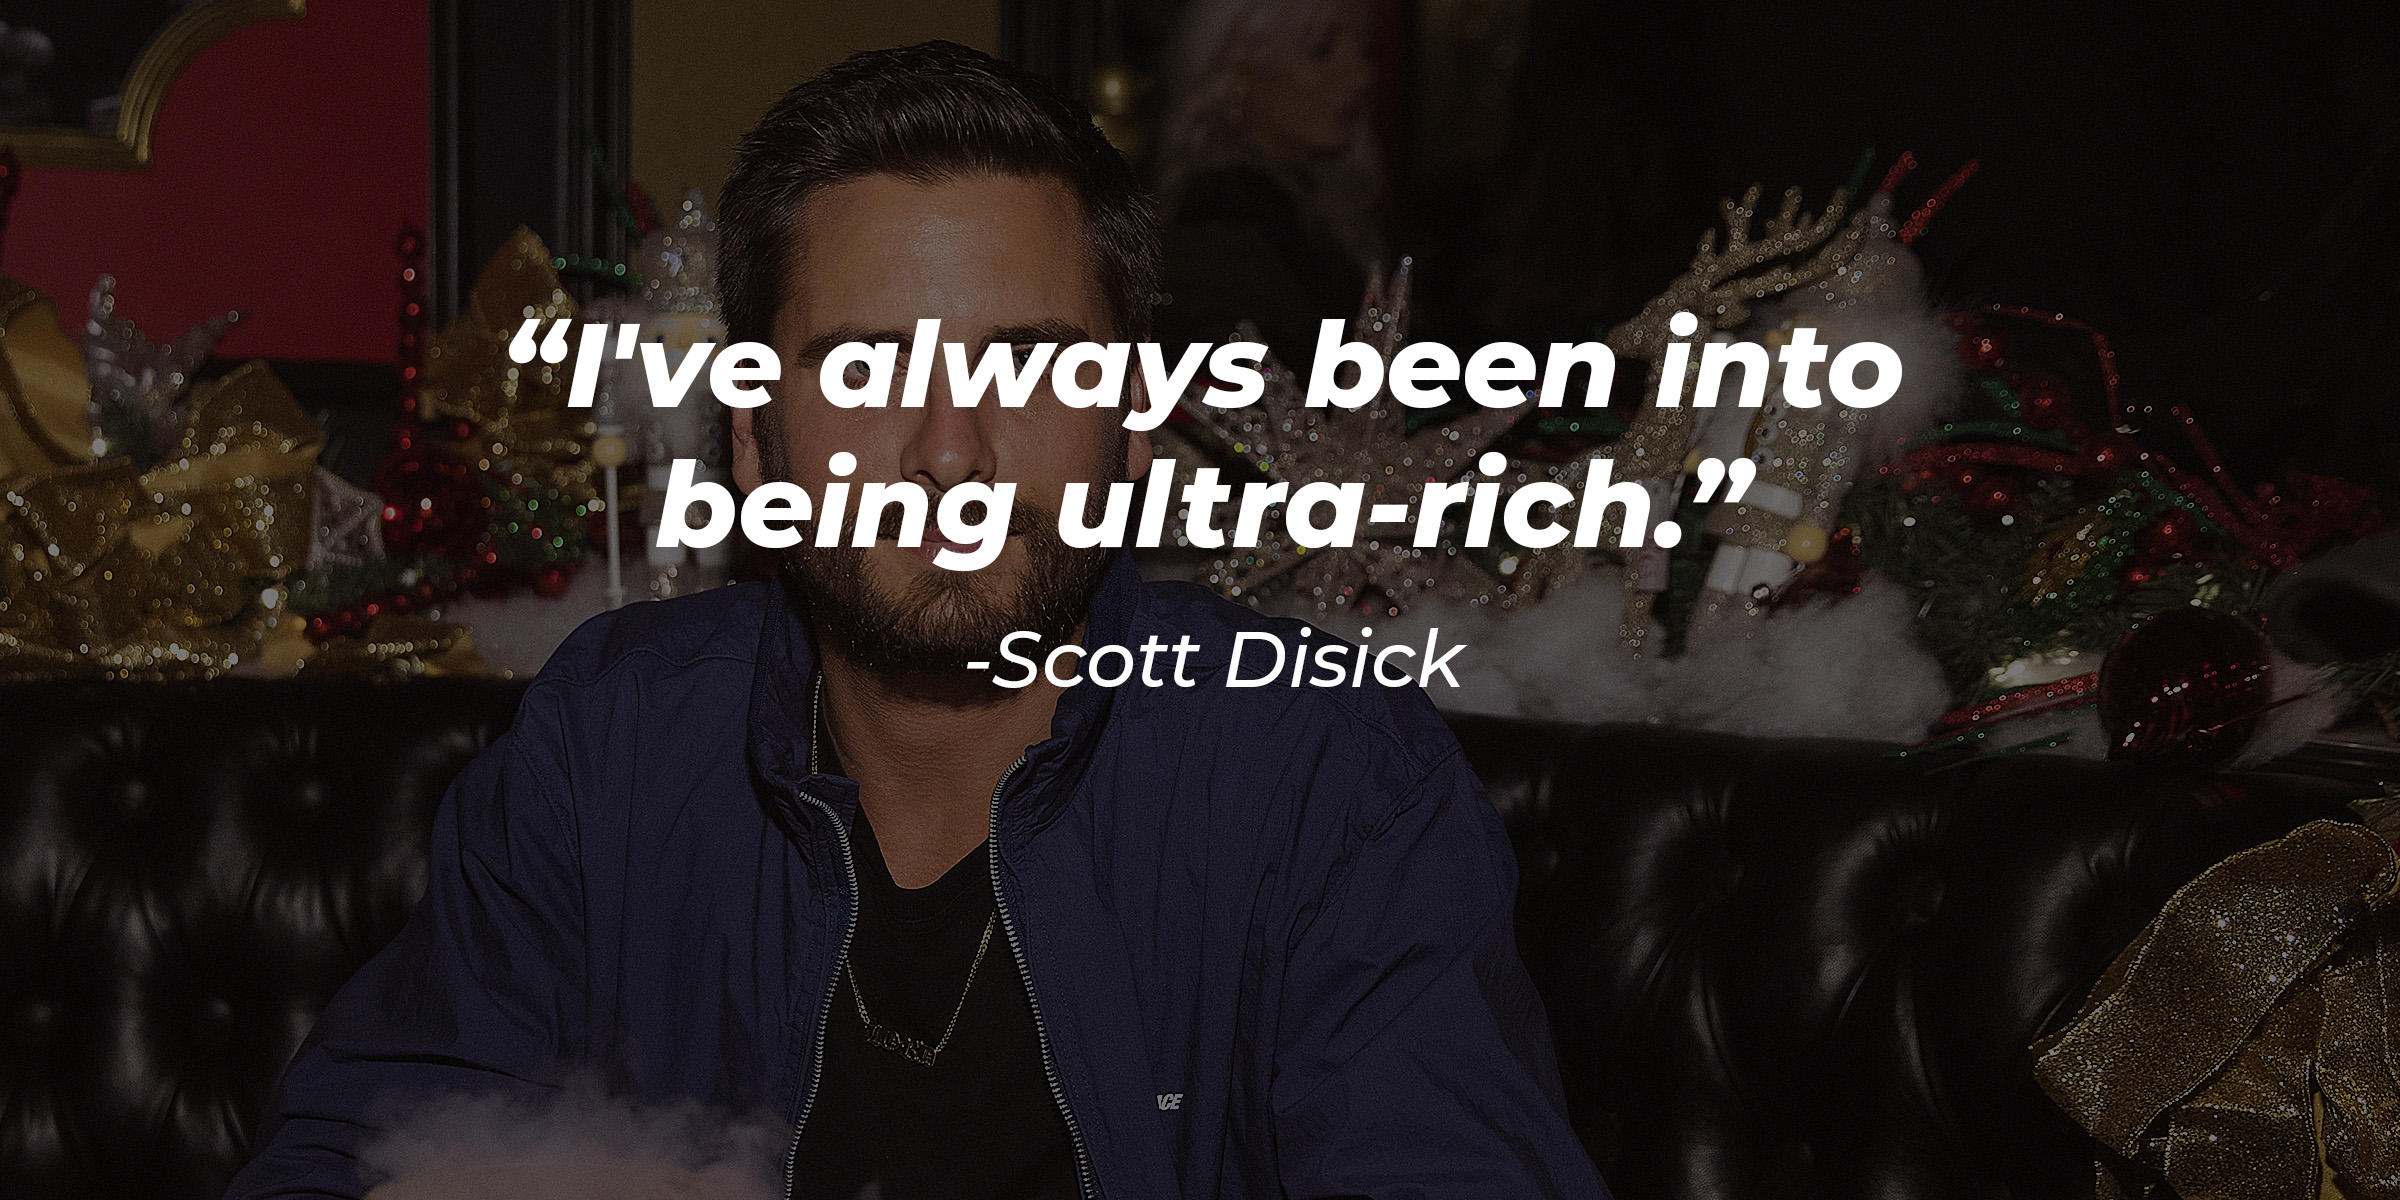 Scott Disick, with his quote: "I've always been into being ultra-rich."